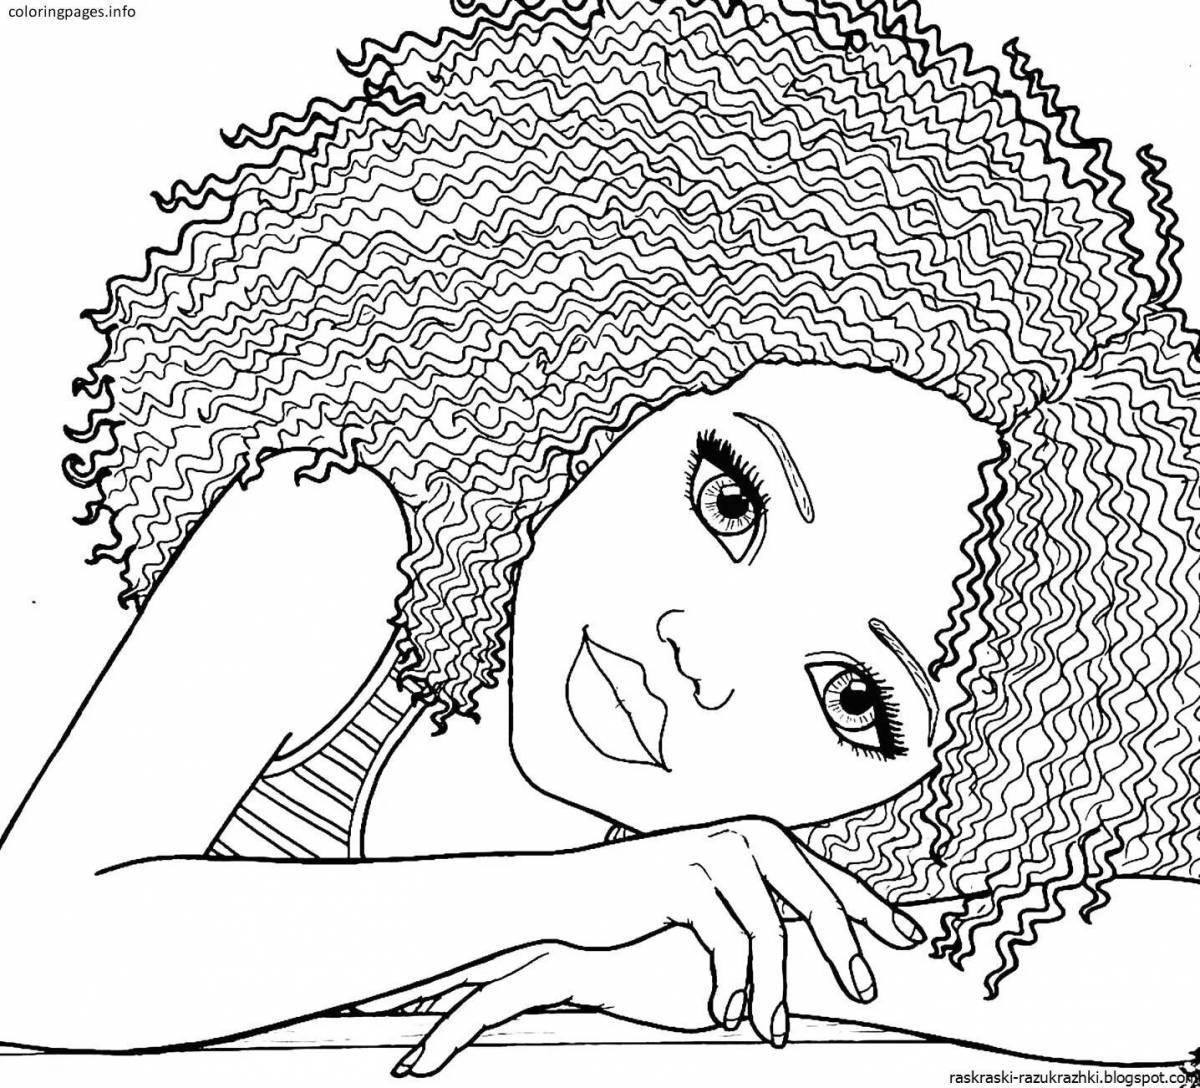 Charming realistic people coloring book